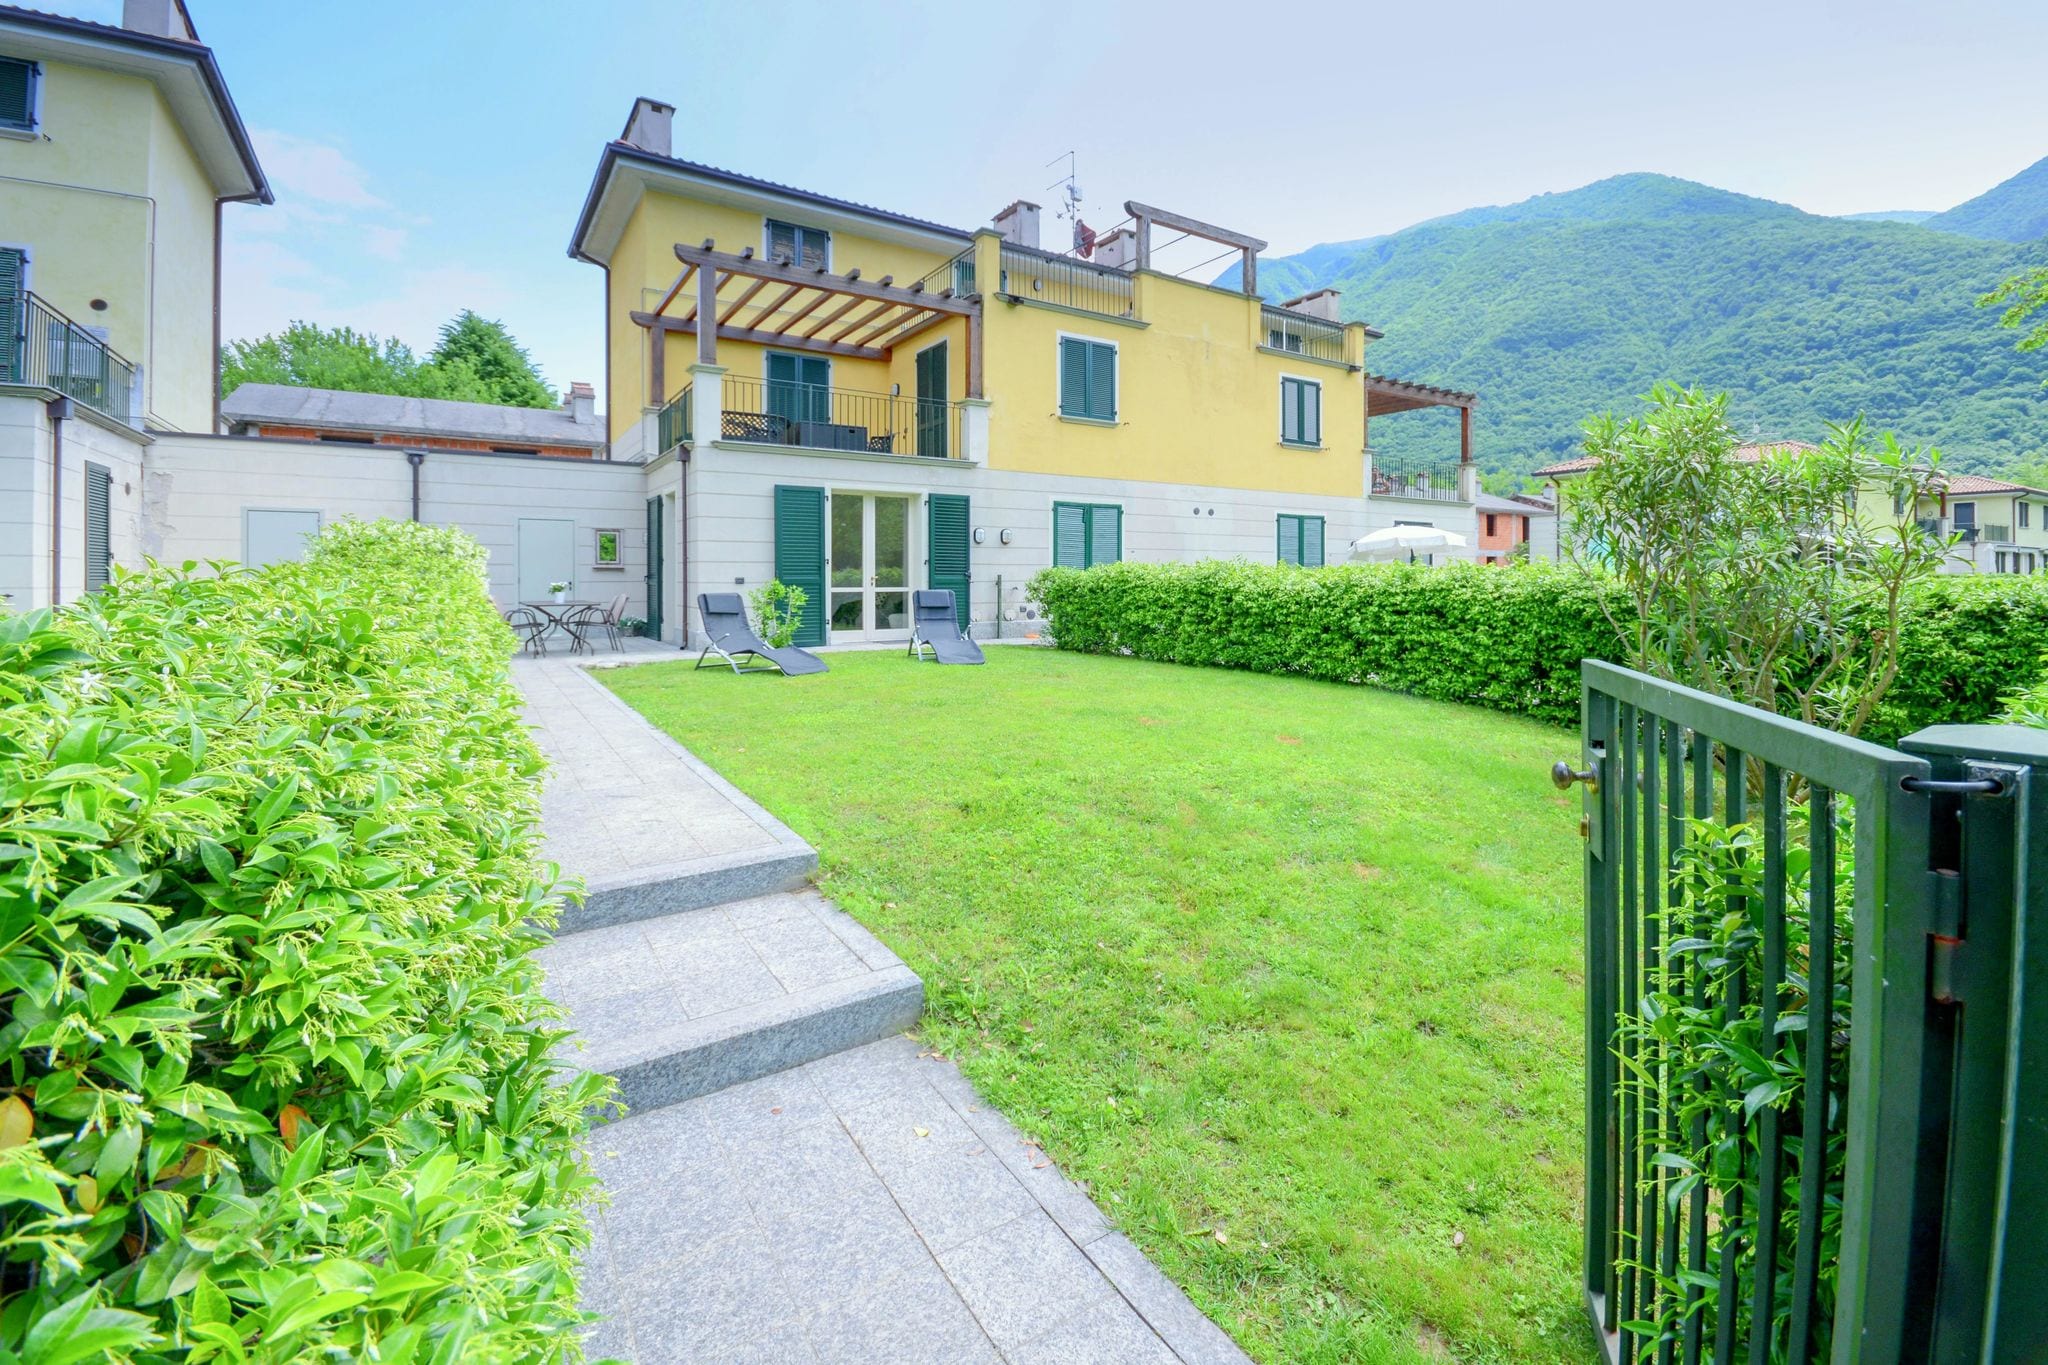 Apartment directly on Lake Lugano with garden and then beautiful park with Lido.